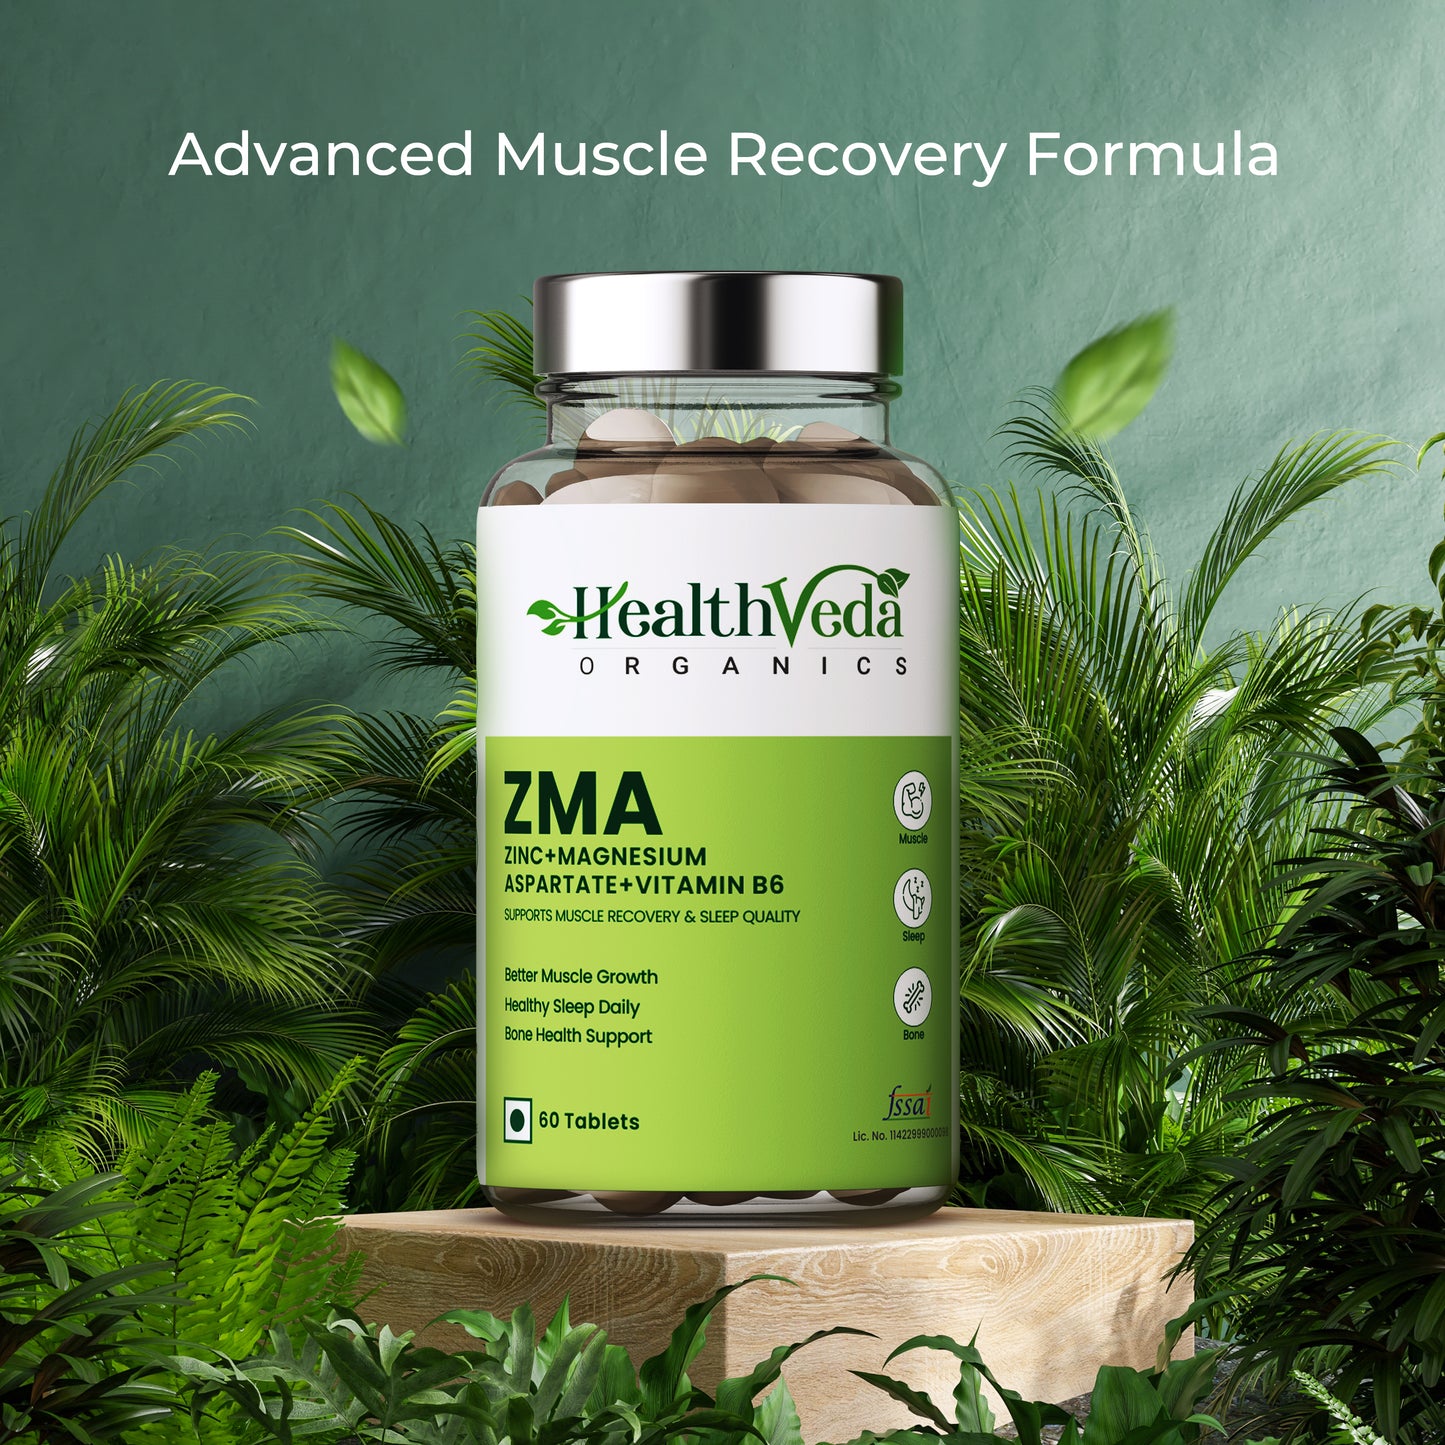 Health Veda Organics ZMA (Zinc, Magnesium Aspartate & Vitamin B6) | Nighttime Muscle Recovery Supplements for Muscle Strength | For Both Men & Women | 60 Veg Tablets